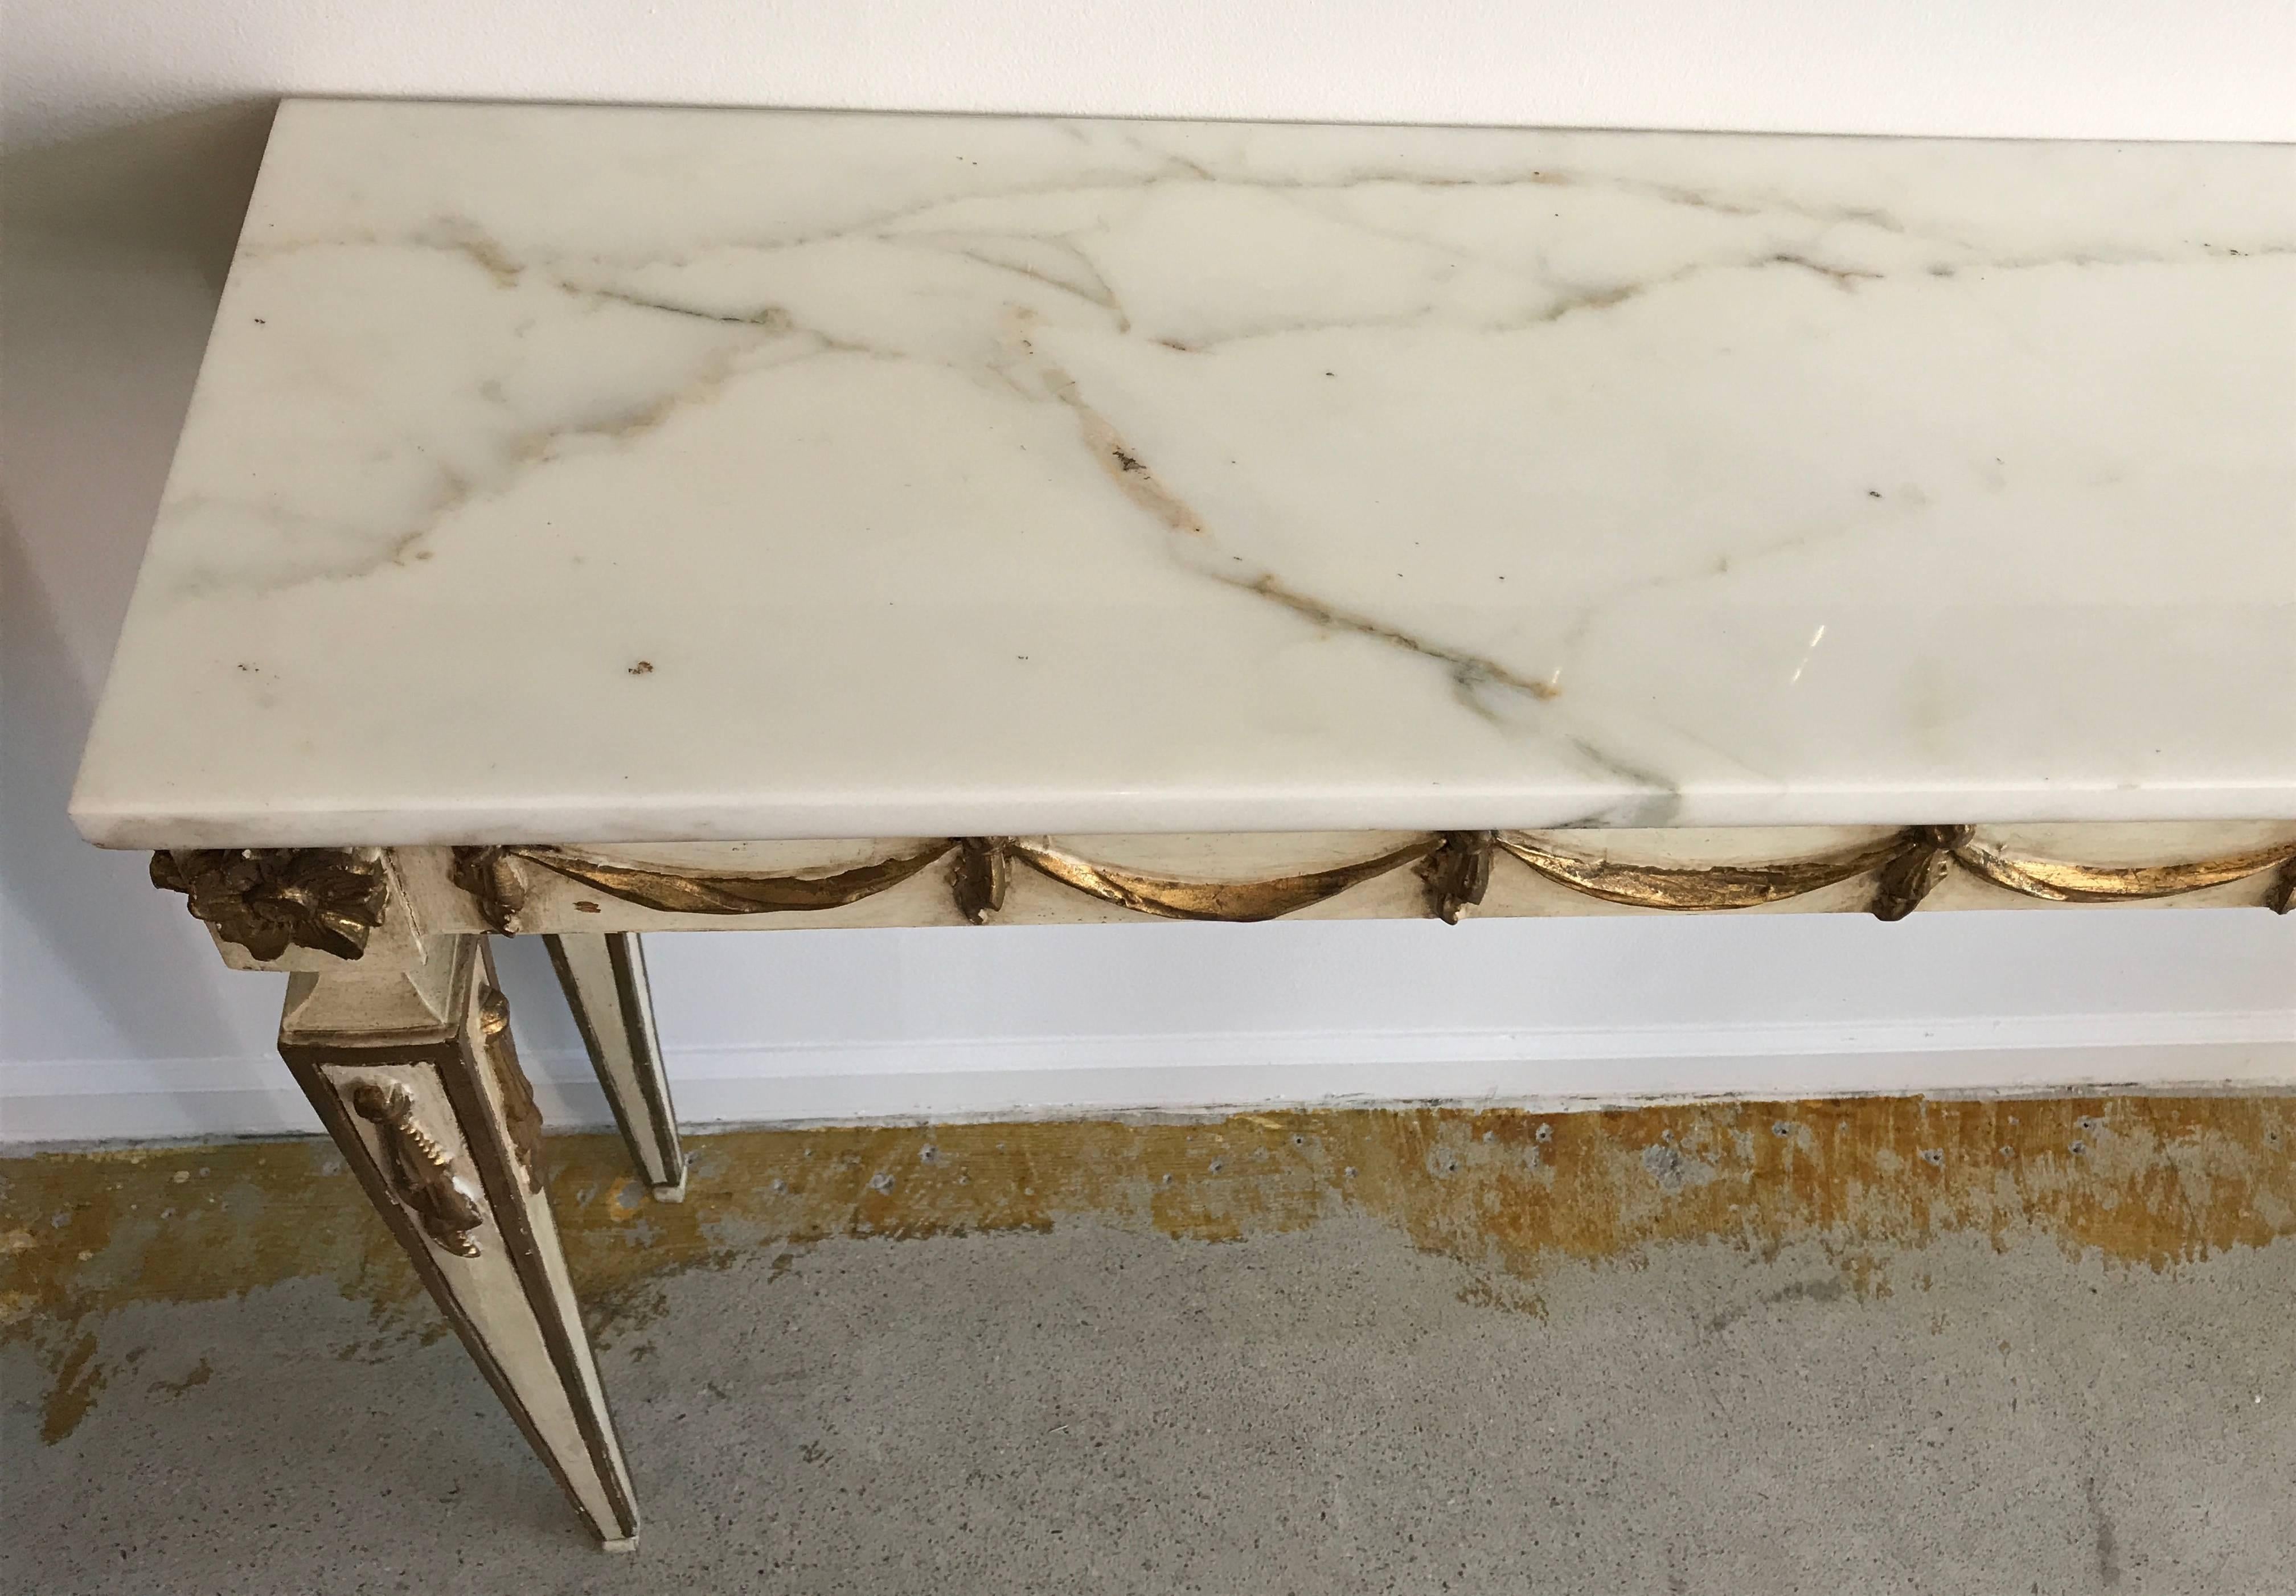 20th Century Italian Painted and Parcel-Gilt Neoclassical Console Table with White Marble Top